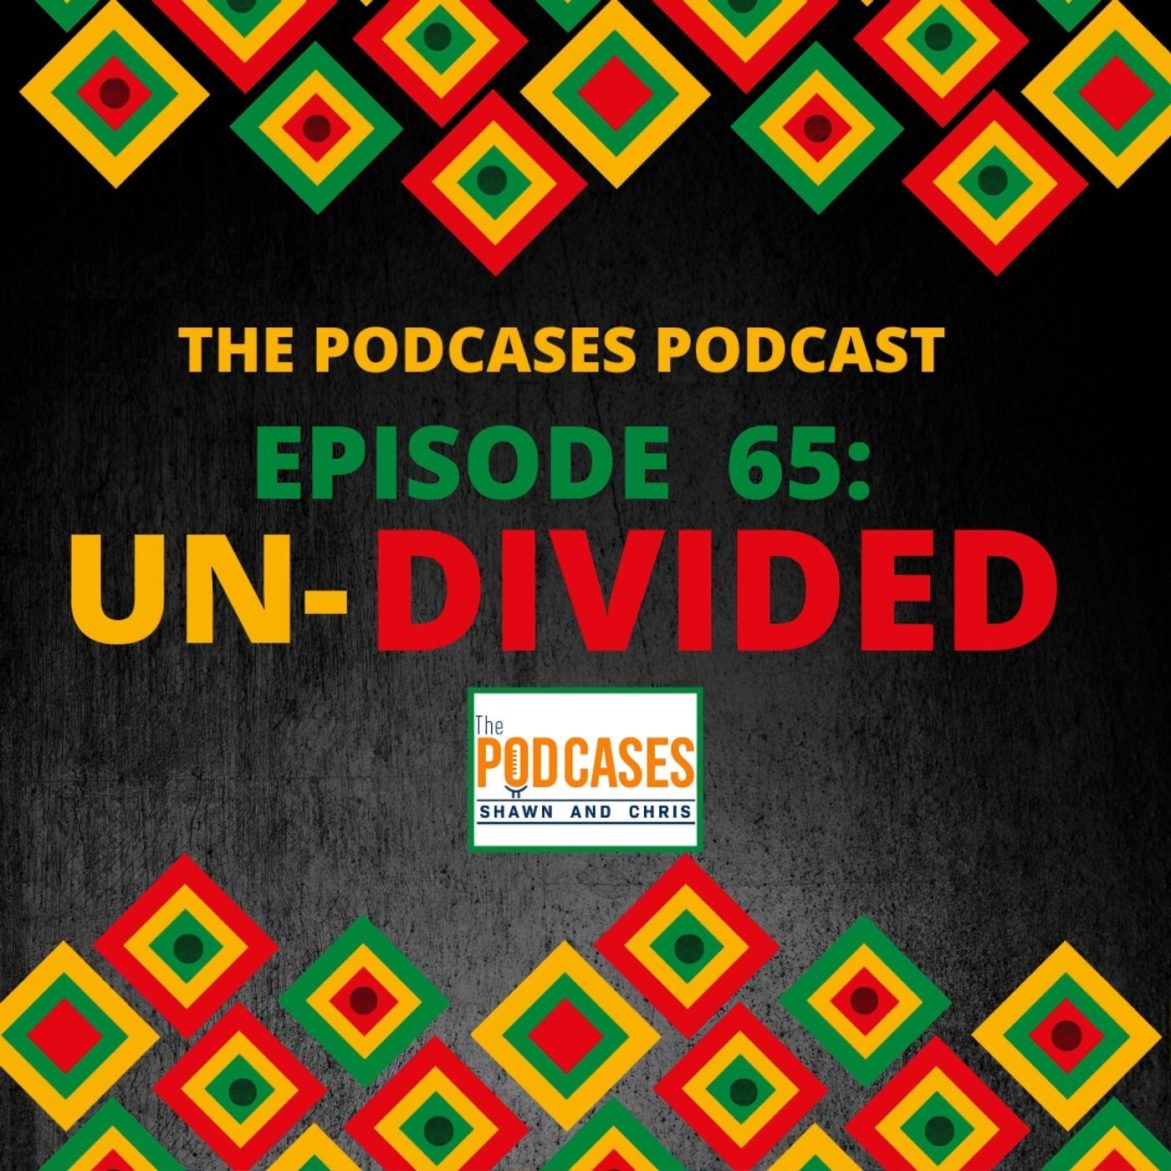 Black Podcasting - UN-DIVIDED | Episode 65 | THE PODCASES Full Episode